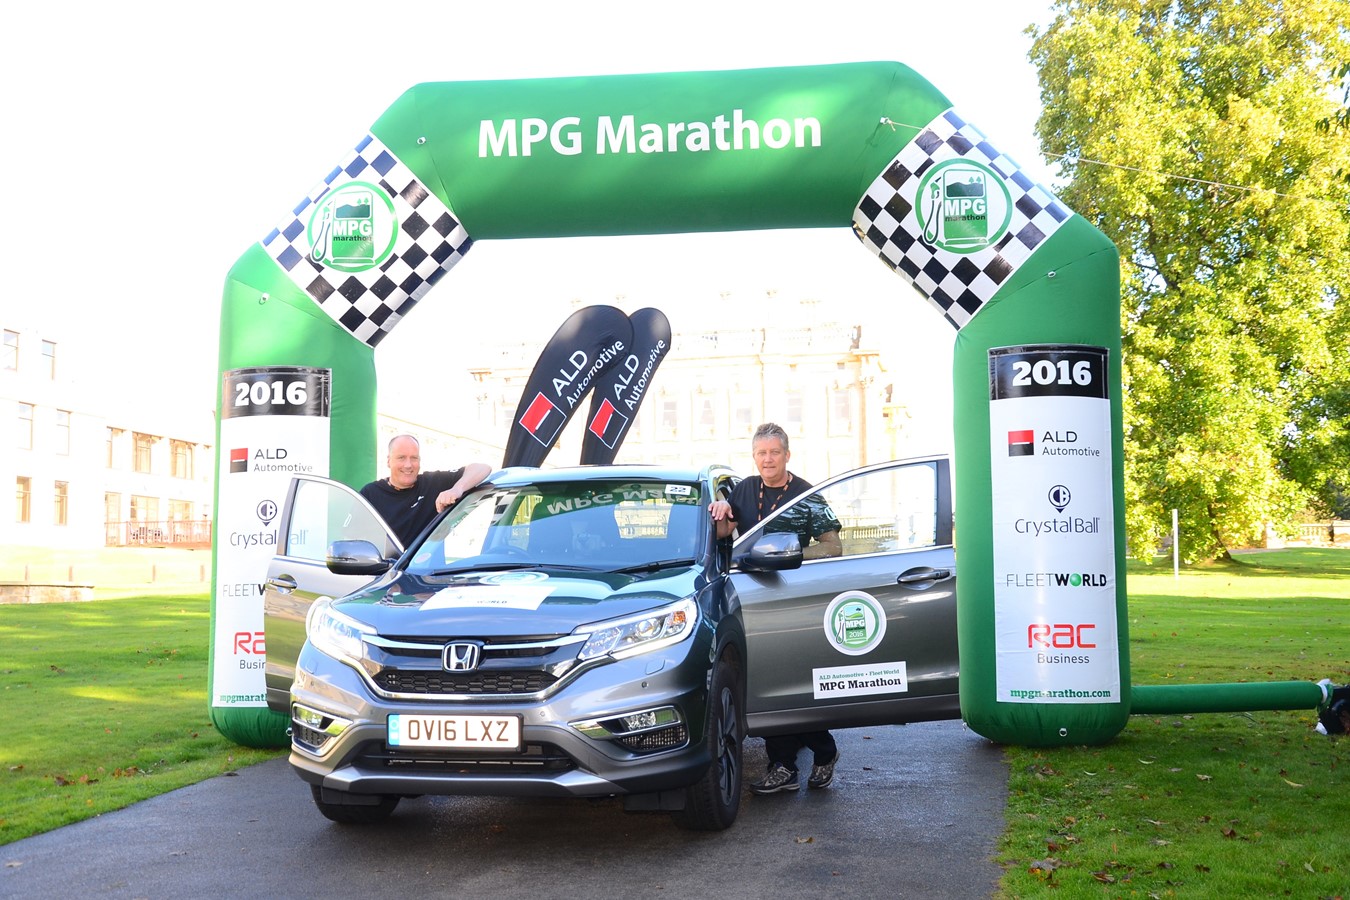 Honda takes home most awards for one manufacturer in 2016 MPG Marathon 